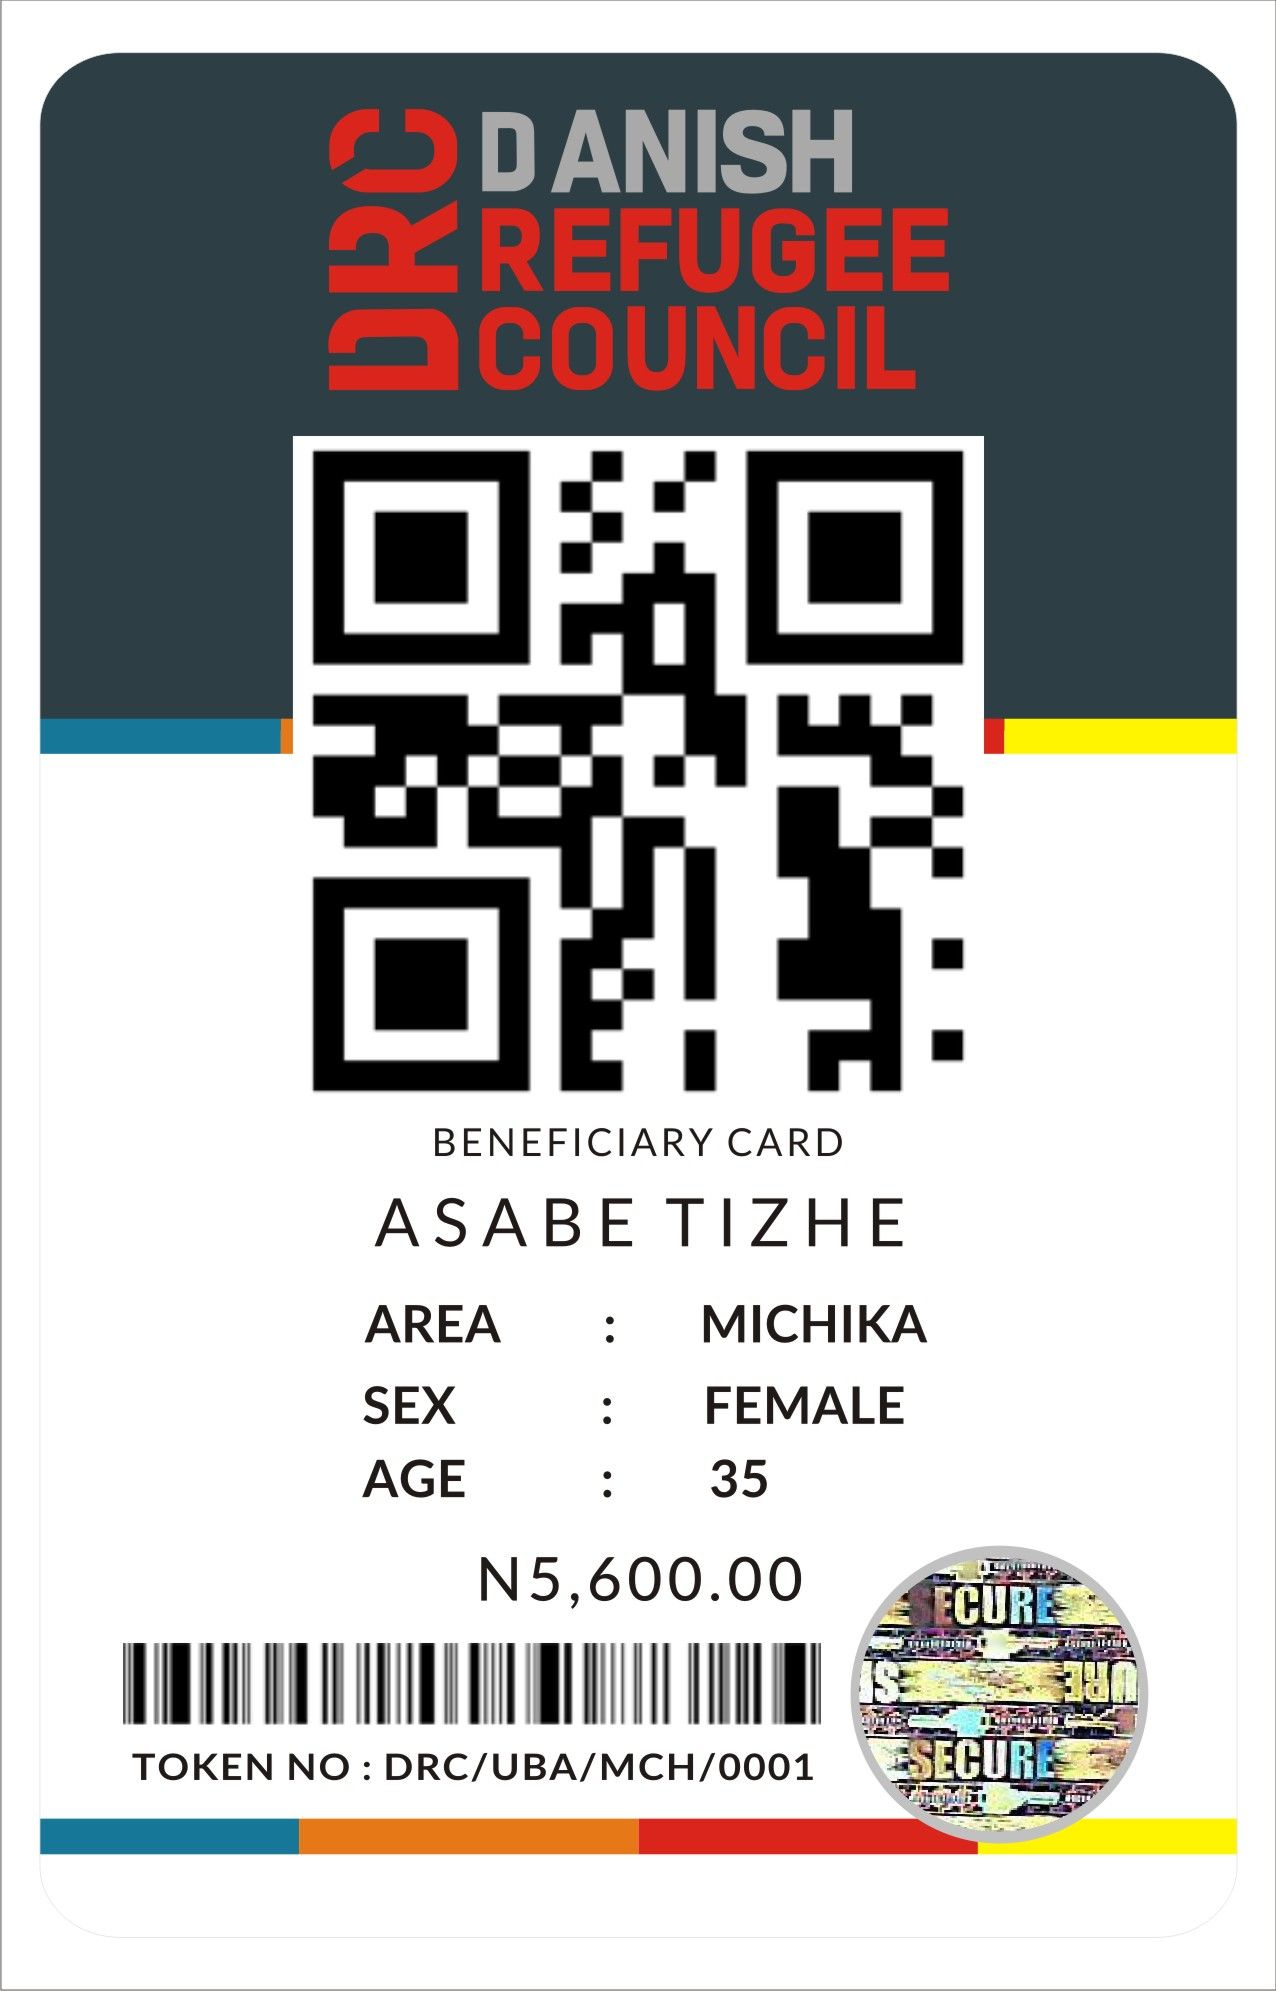 BAR CODE, QR CODE, AUTHENTICATION LABELS PRINTING CALL EMMANUEL ON 08176499649